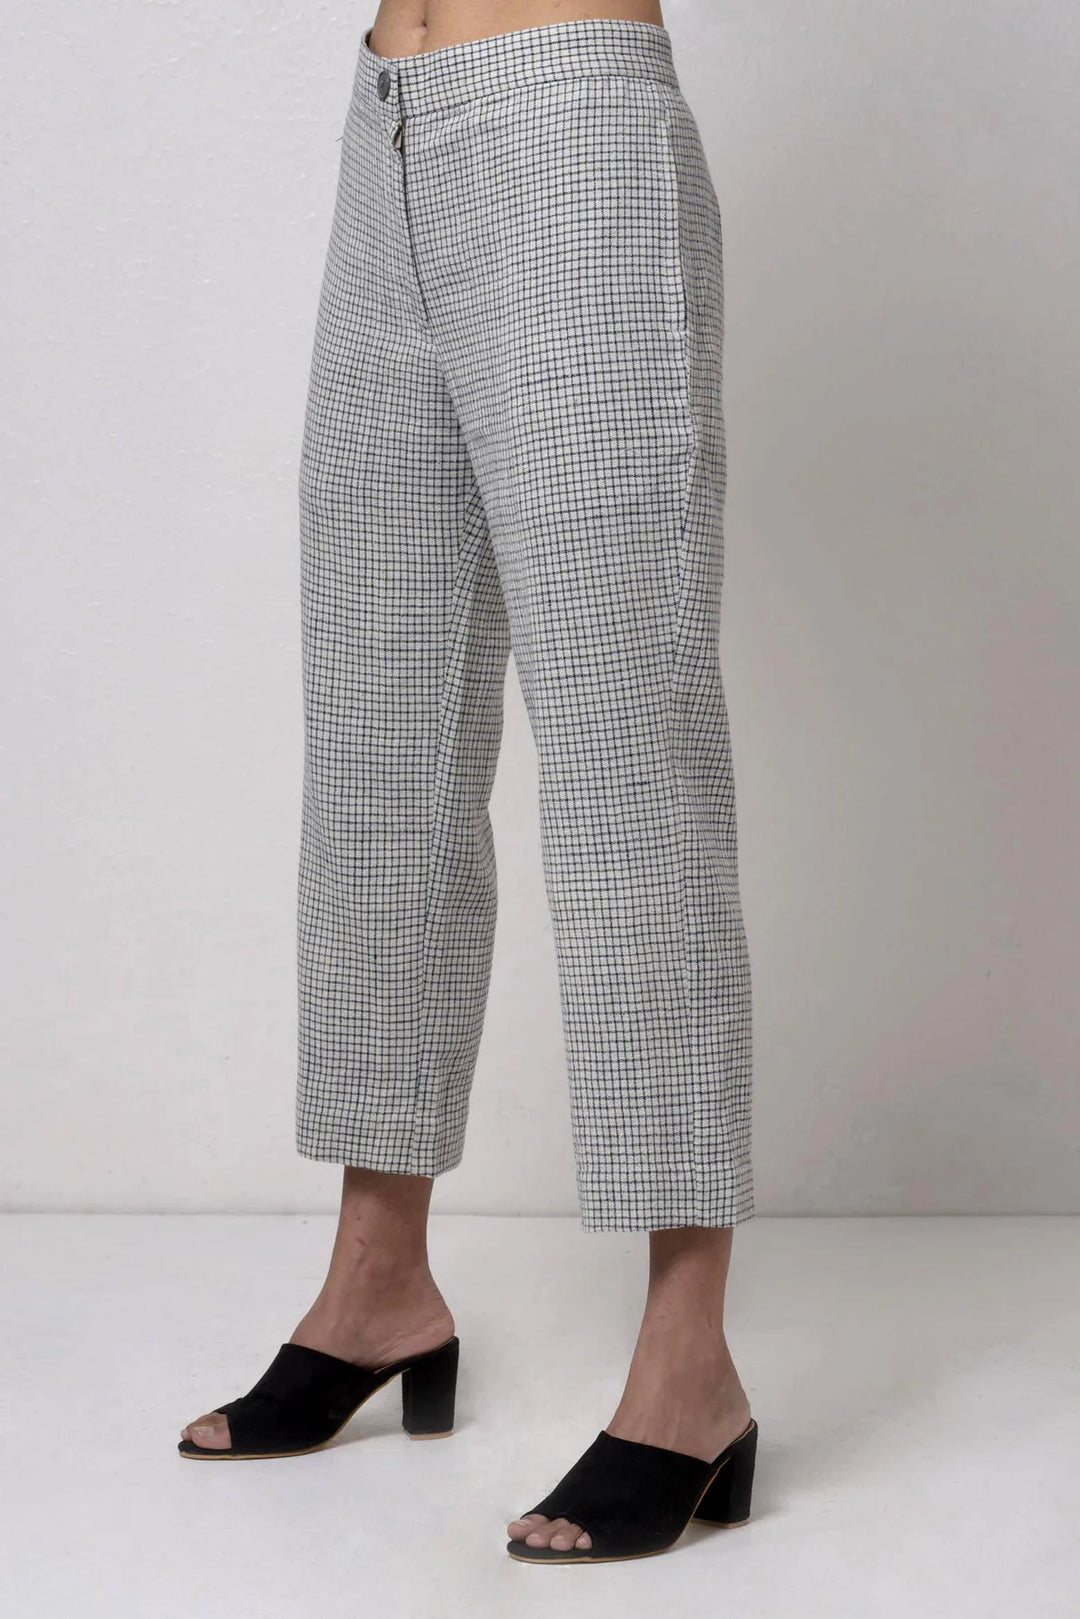 White and Blue Check Handwoven Cotton Trousers | Reina Handwoven Trousers - White & Blue